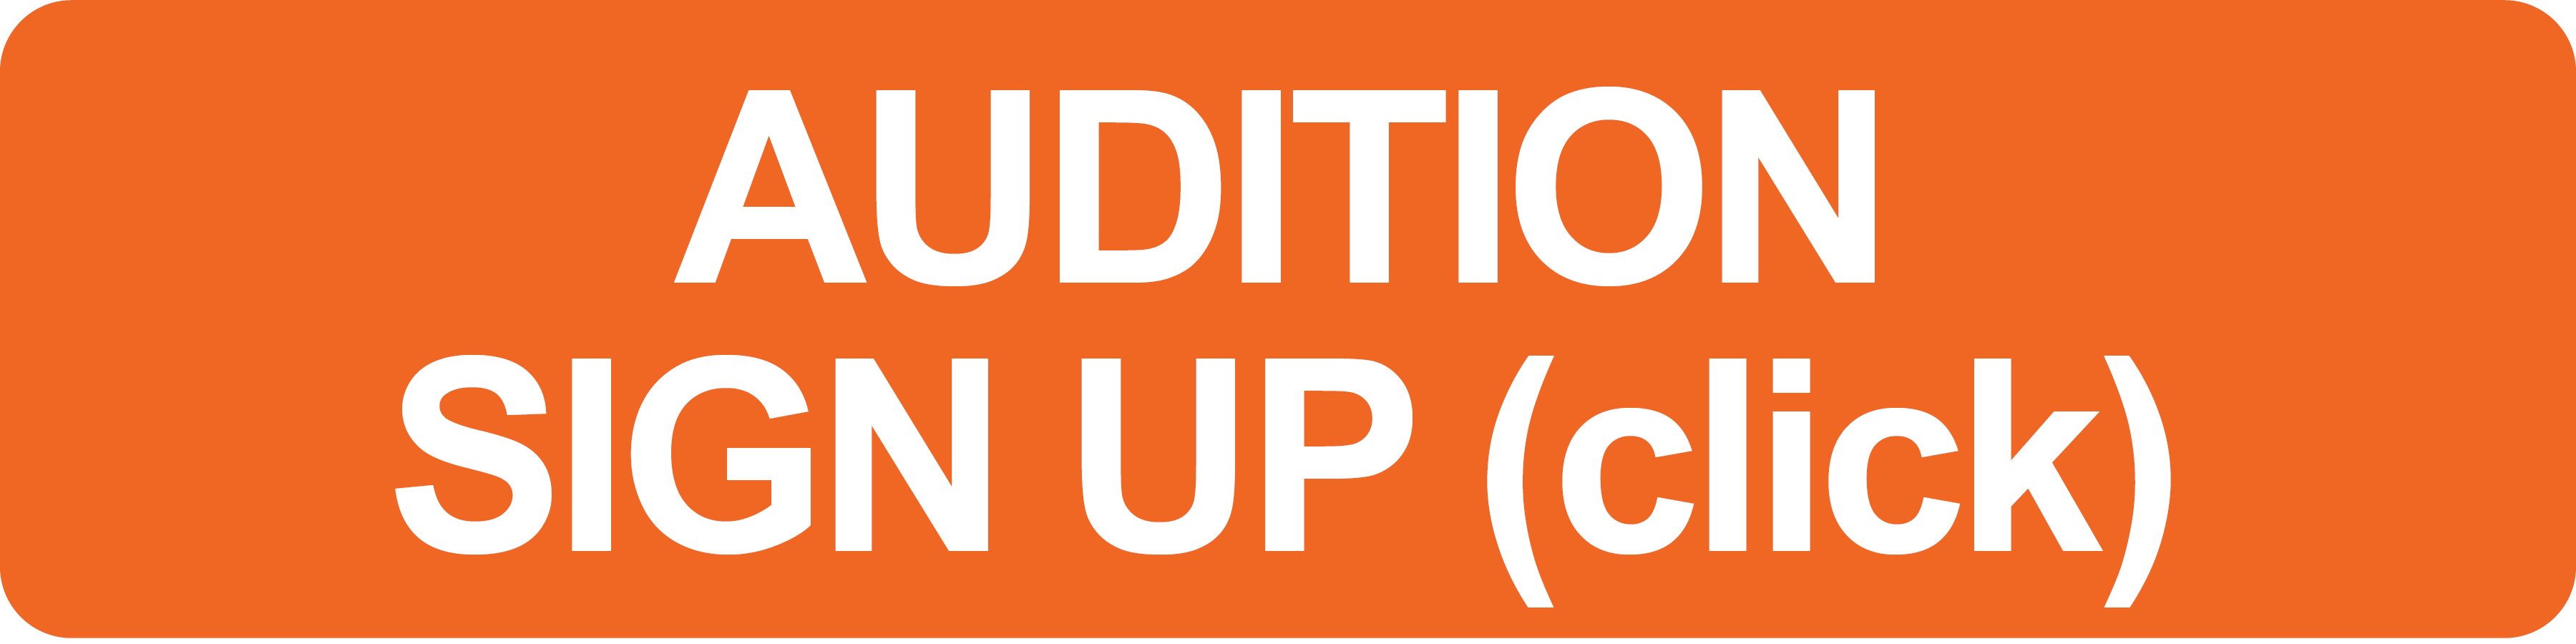 Audition Sign Up